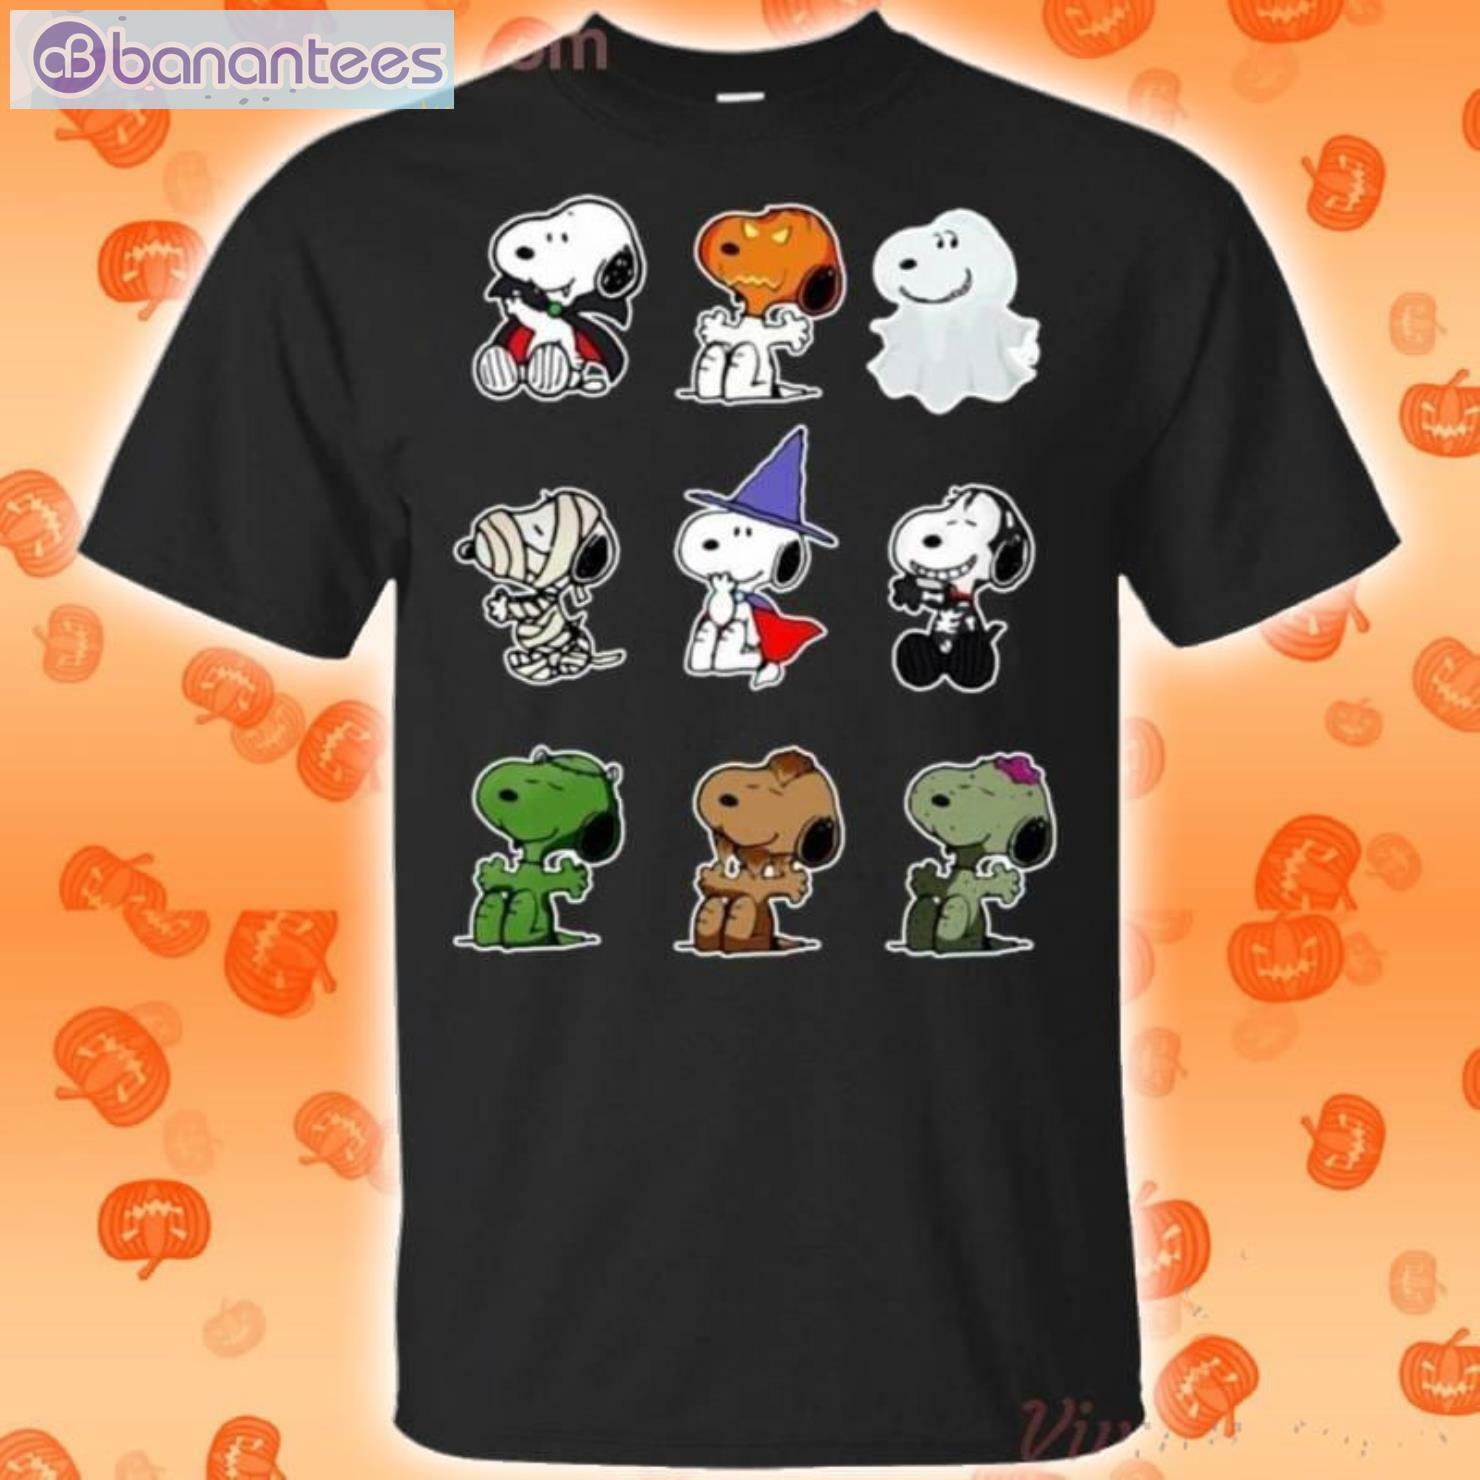 Snoopy Halloweens Funny T-Shirt Product Photo 1 Product photo 1